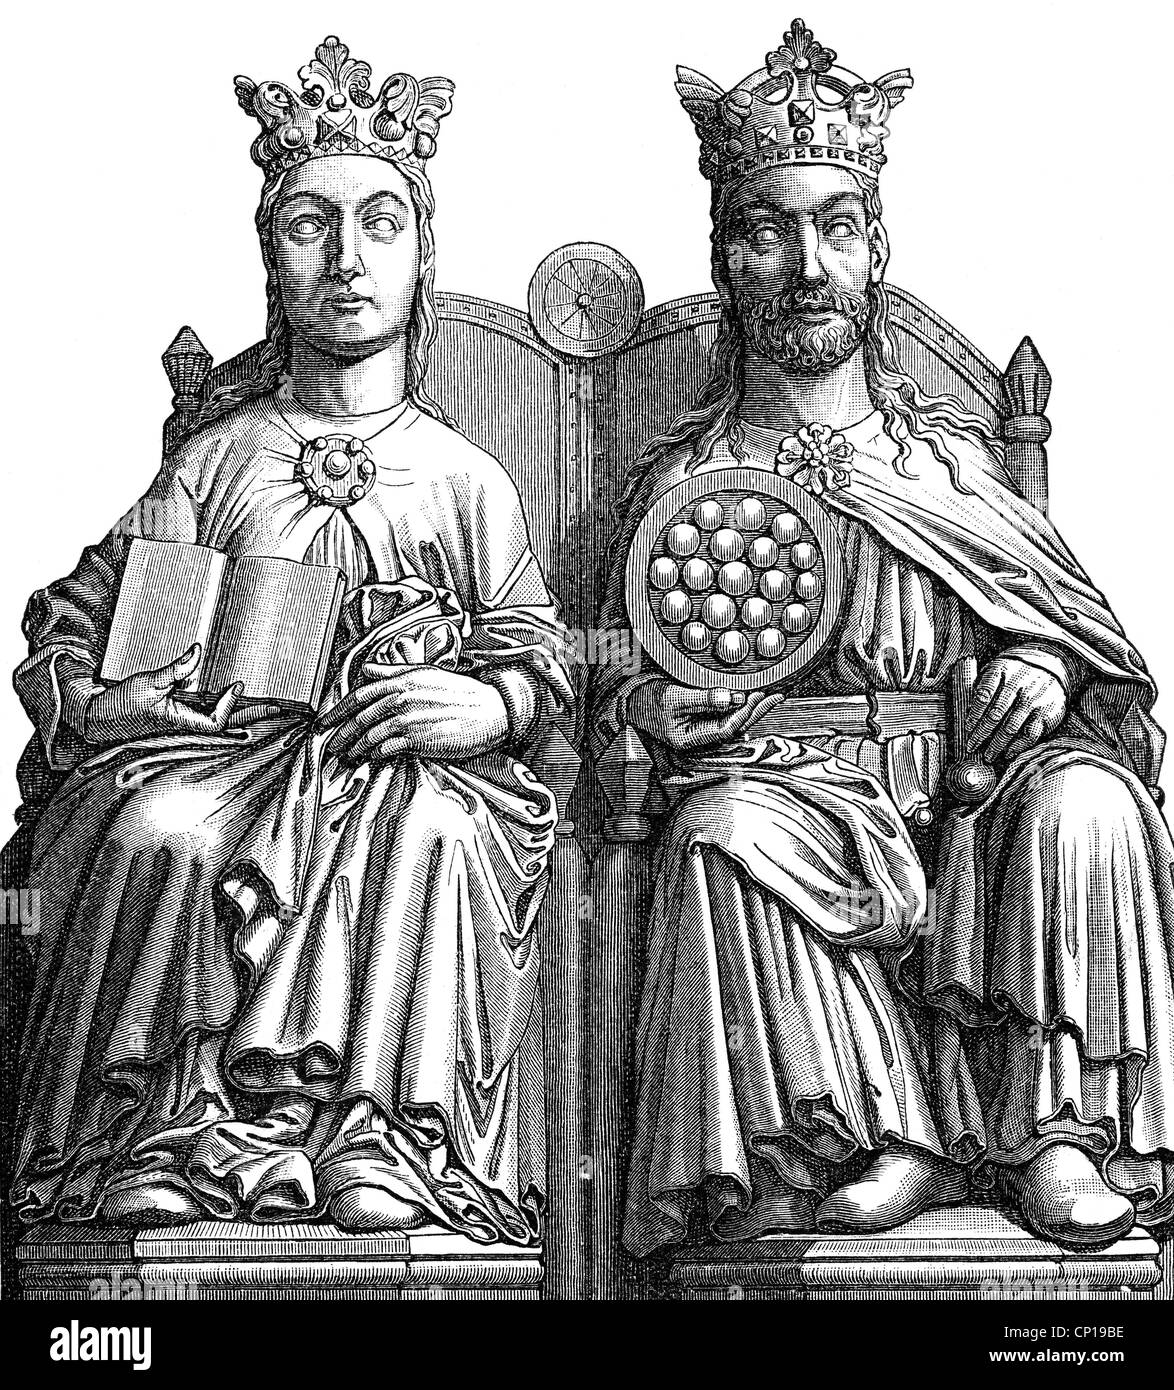 Otto I 'the Great',  23.11.912 - 7.5.973, Holy Roman Emperor 2.2.962 - 7.5.973, with first wife Edith, sculpture, Magdeburg Cathedral, circa 1250, wood engraving, 19th century, , Stock Photo